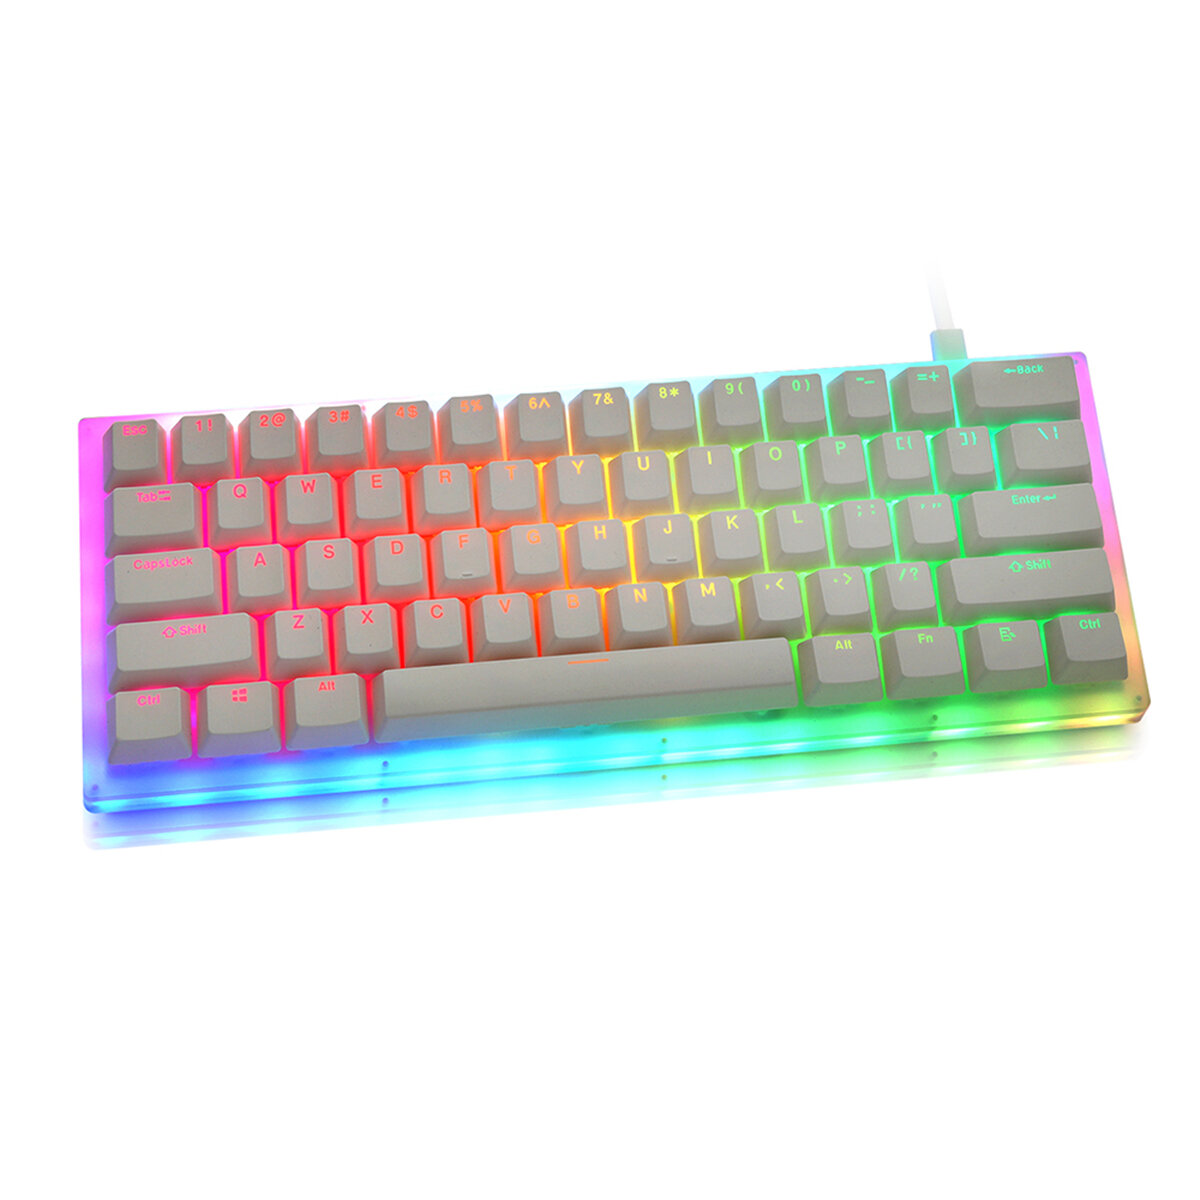 GamaKay K61 Mechanical Keyboard 61 Keys 60 Keyboard Hot Swappable Type-C 3.1 Wired USB Translucent Glass Base Gateron Switch ABS Two-color Keycap NKRO RGB Gaming Keyboard